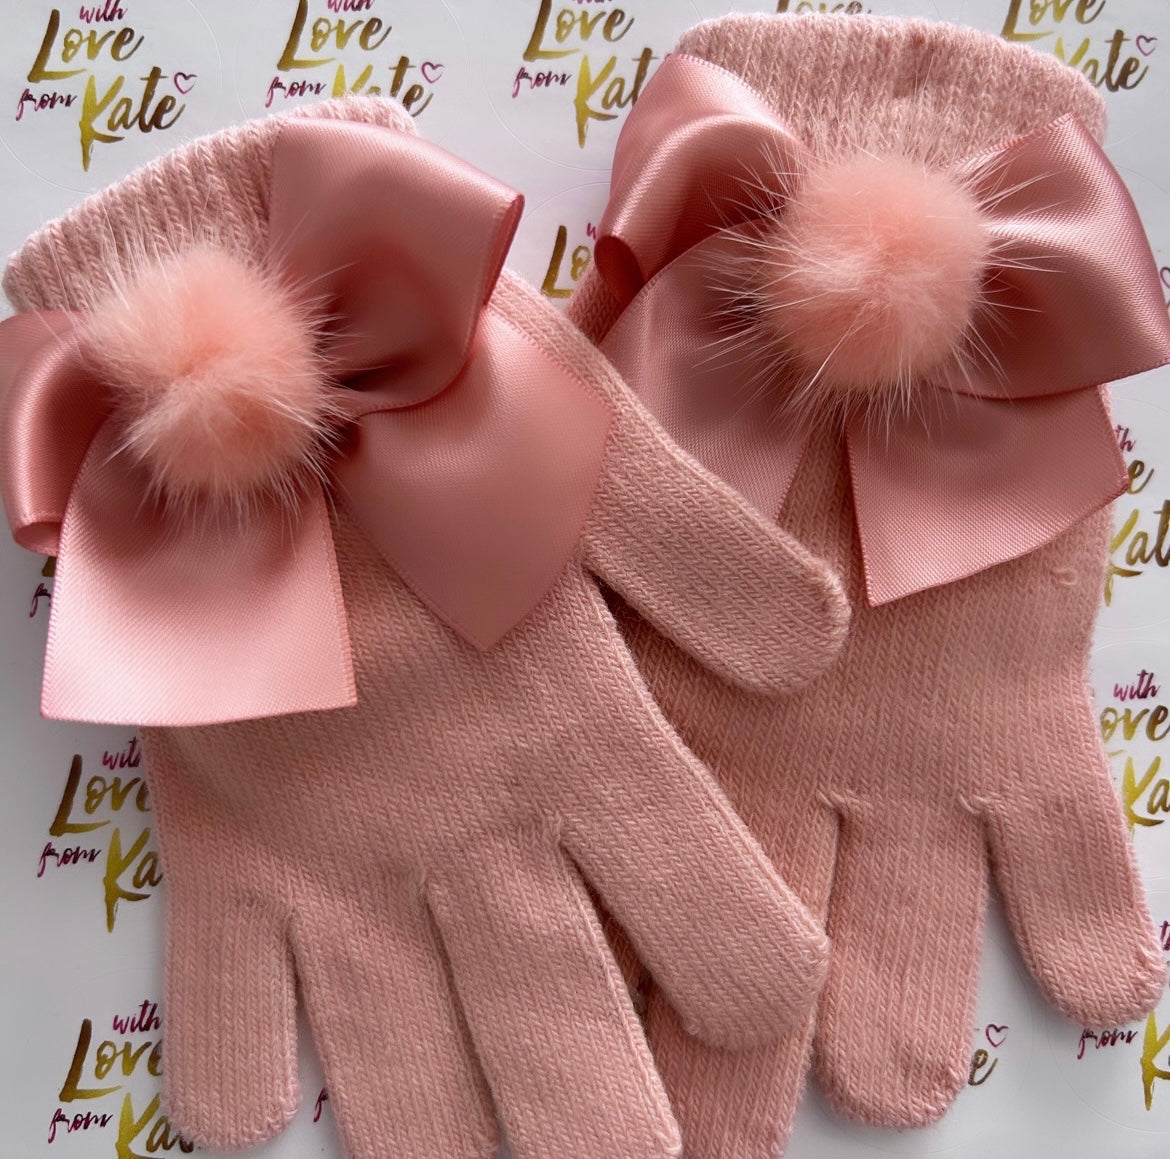 Dusky Pink Gloves with satin bows and pom poms.